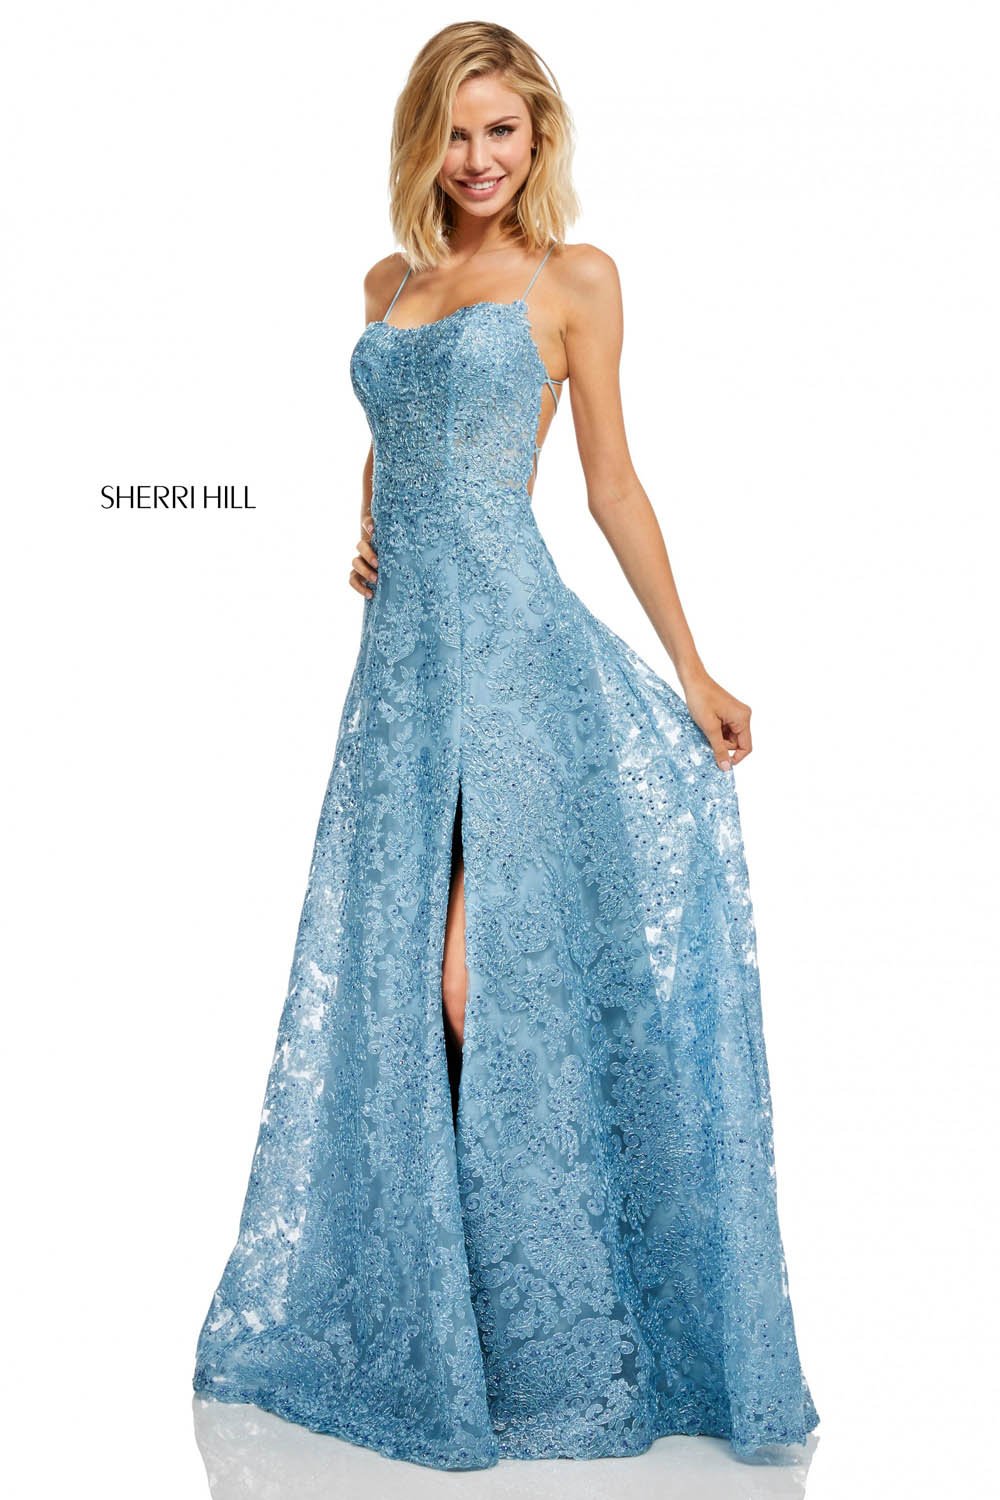 Sherri Hill 52646 dress images in these colors: Ivory, Light Blue, Rose Gold, Gold, Wine, Black.